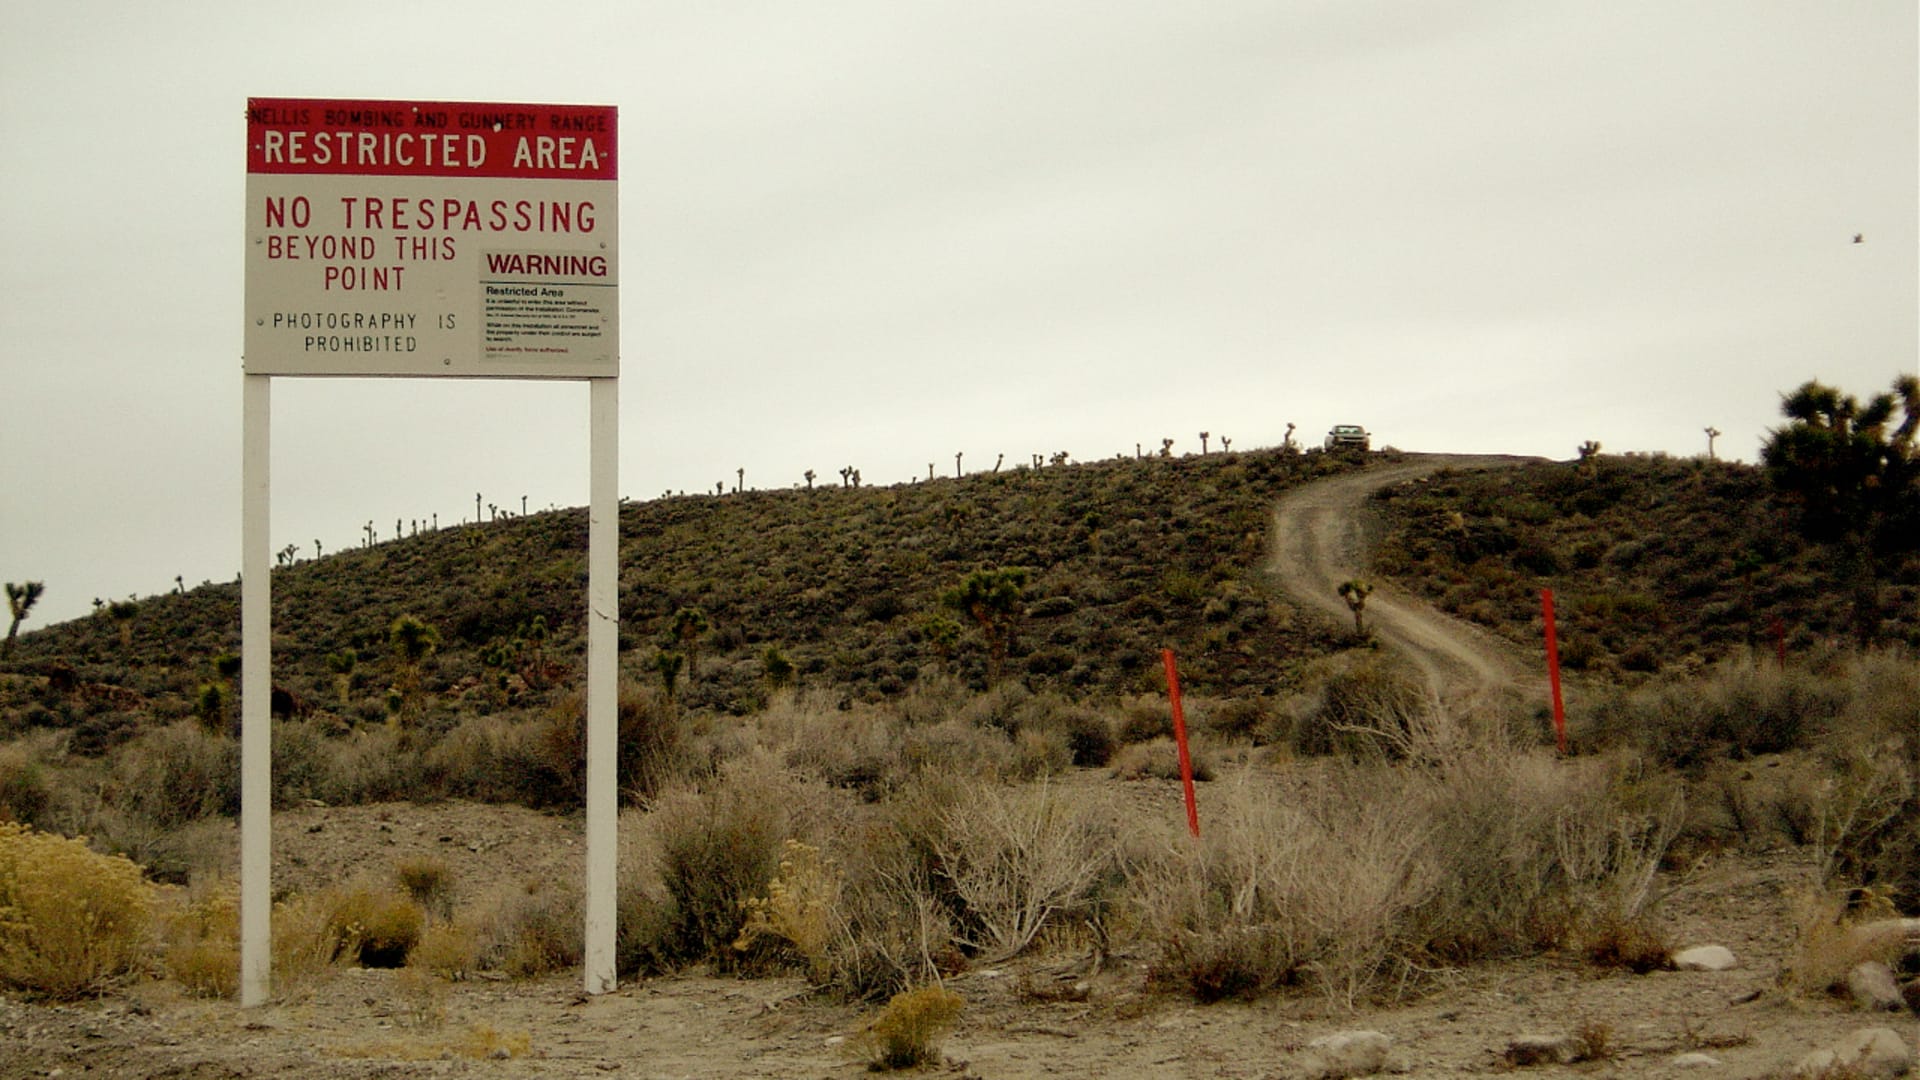 400,000 people have joined a Facebook event pledging to raid Area 51